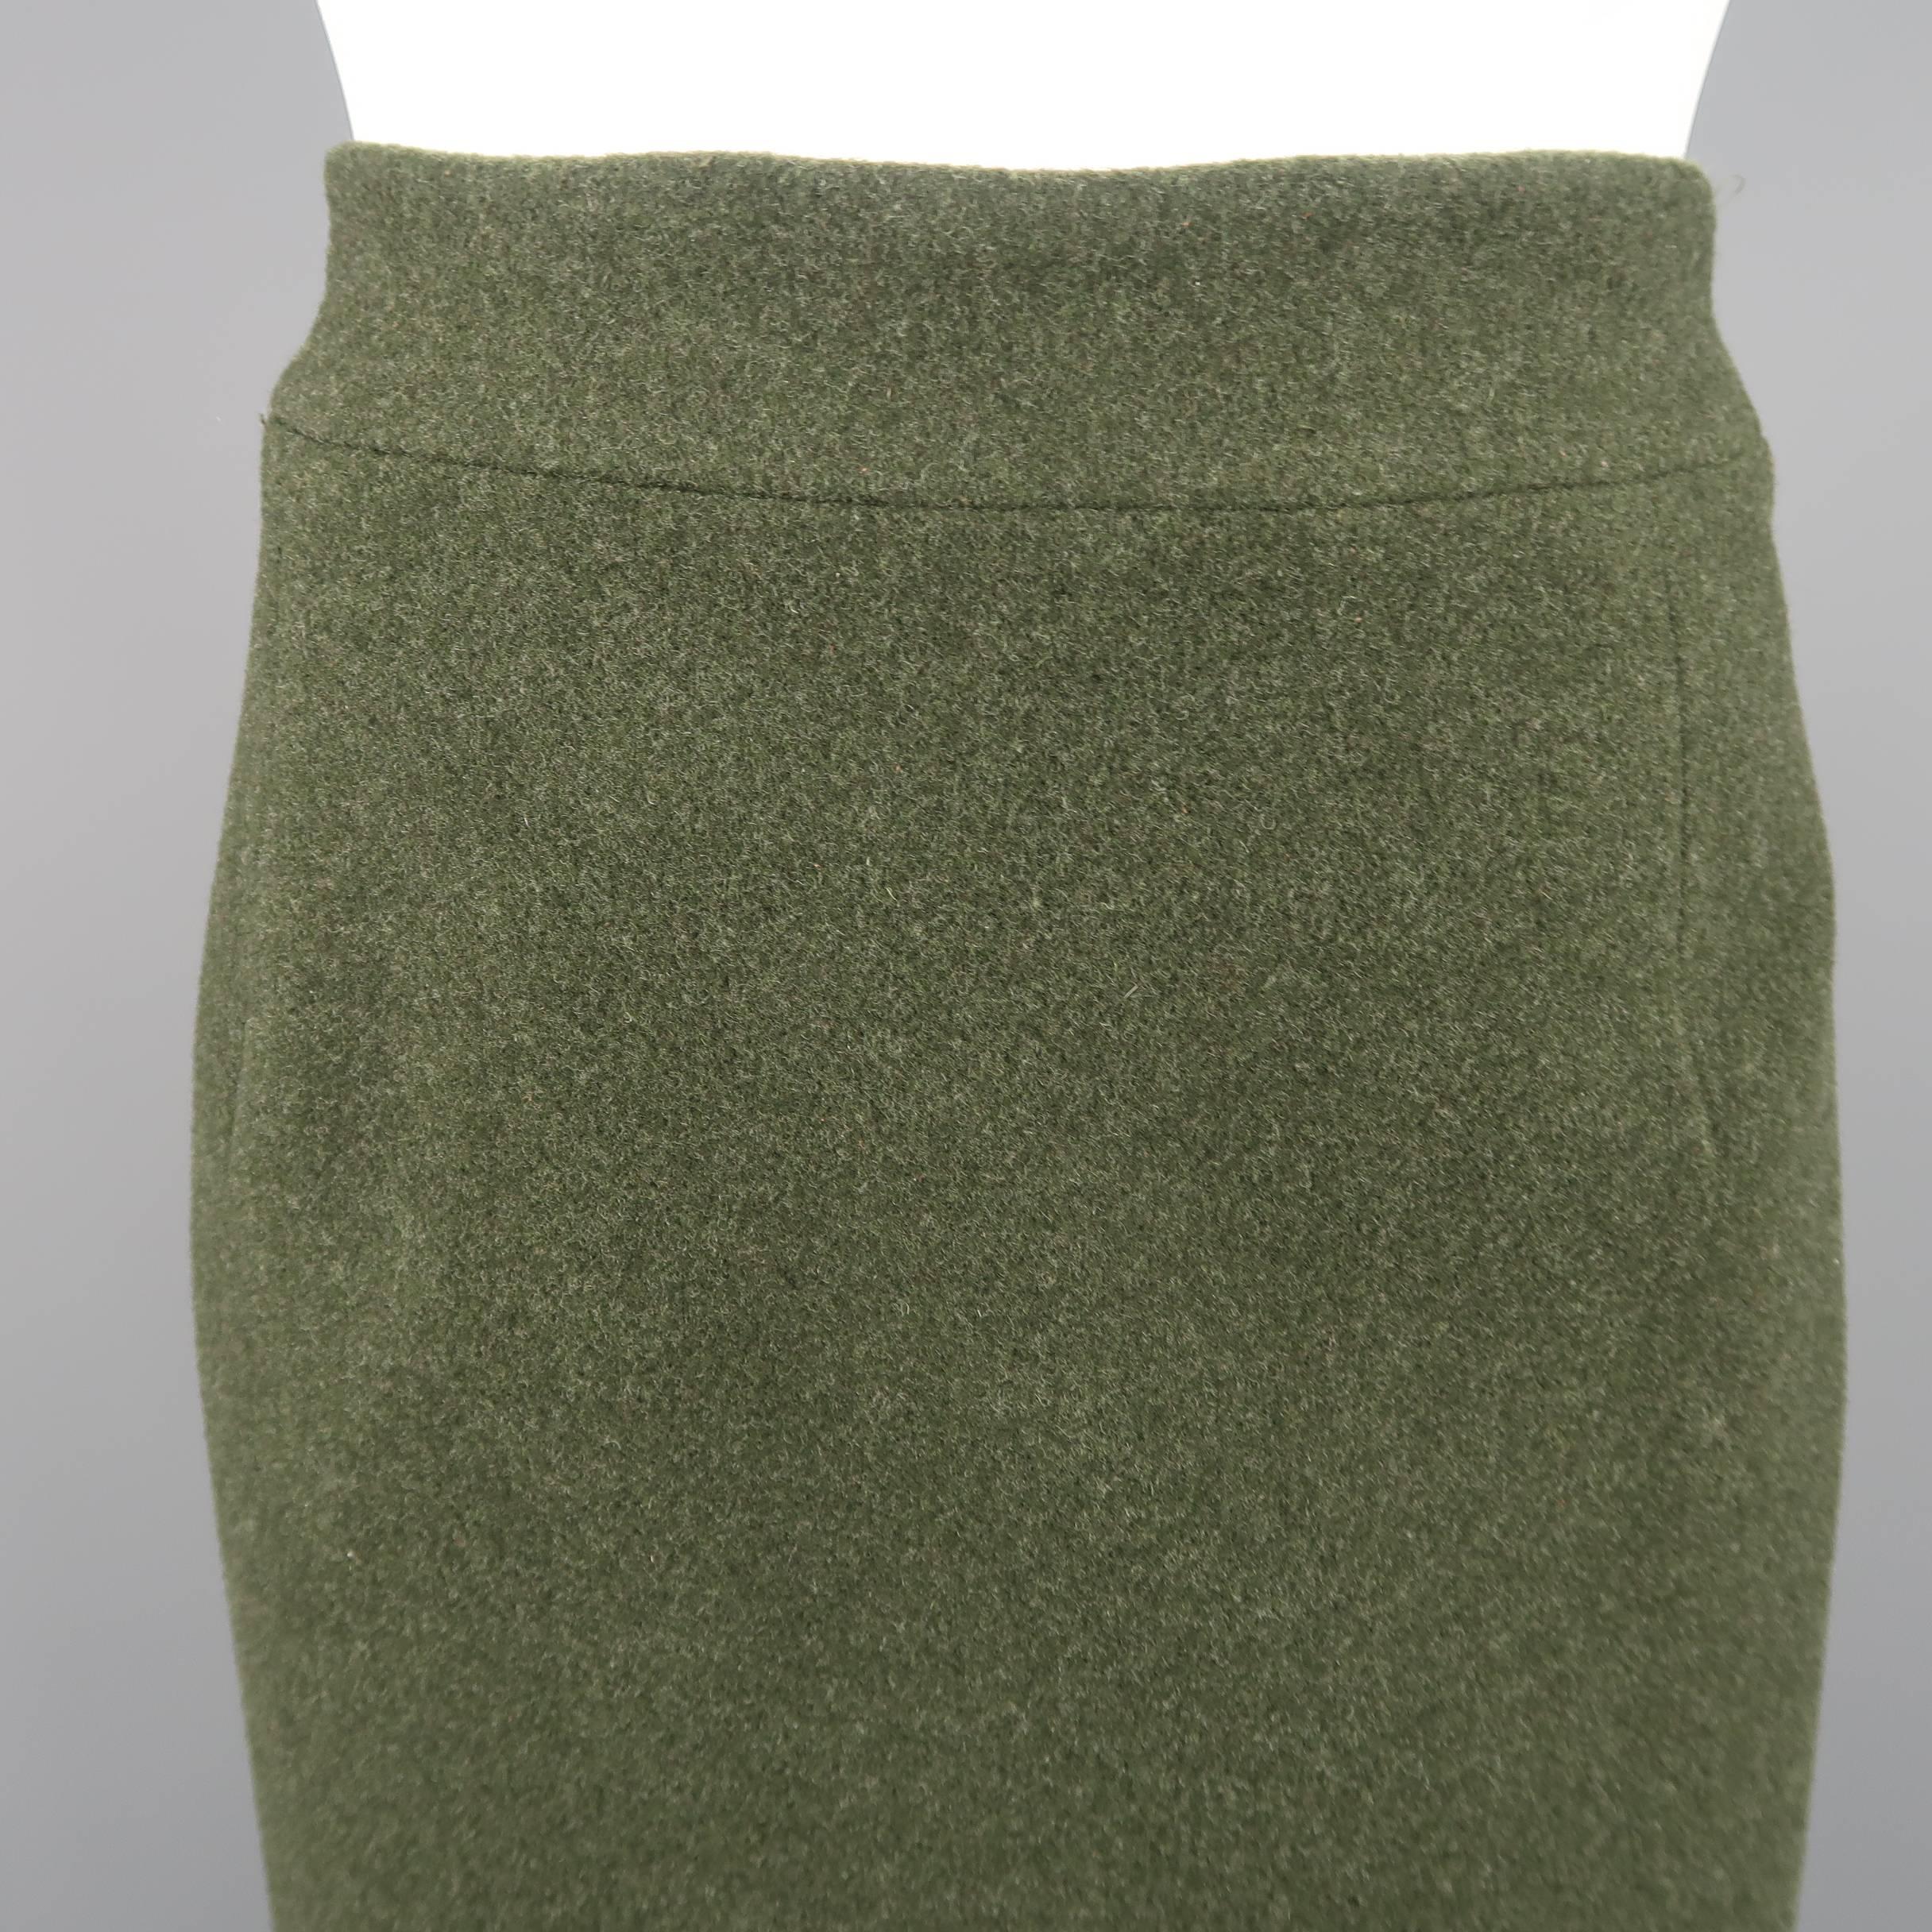 Vintage COLLECTION by RALPH LAUREN skirt comes in forest green wool cashmere blend felt with an A line shape and darted waist. Matching jacket sold separately. Made in USA.
 
Excellent Pre-Owned Condition.
Marked: 8
 
Measurements:
 
Waist: 28